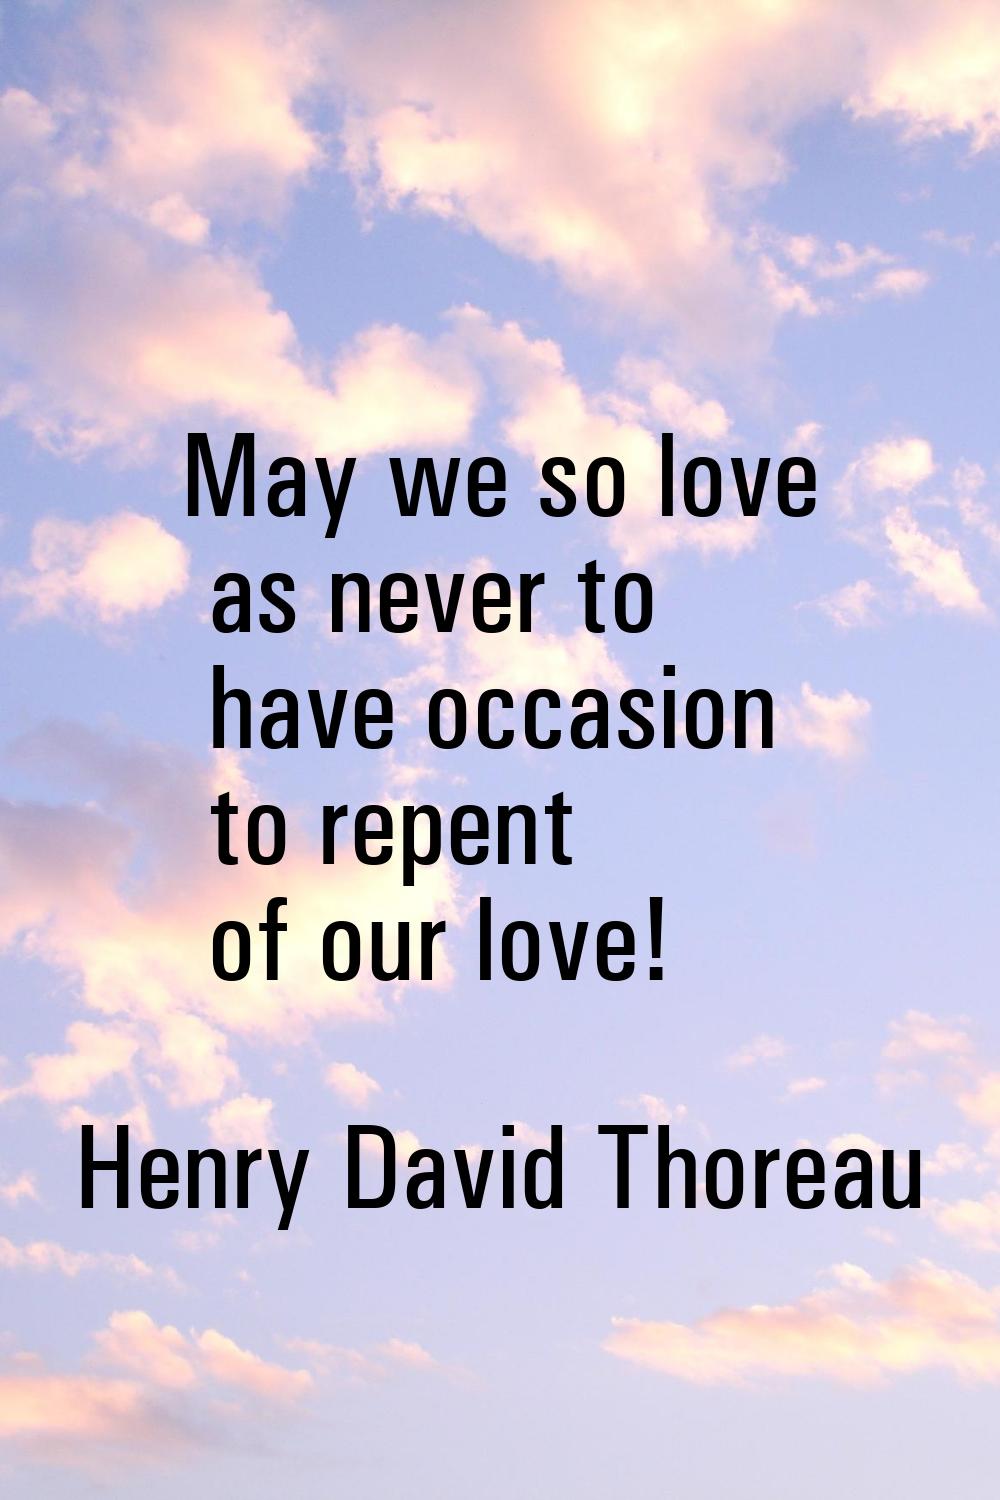 May we so love as never to have occasion to repent of our love!